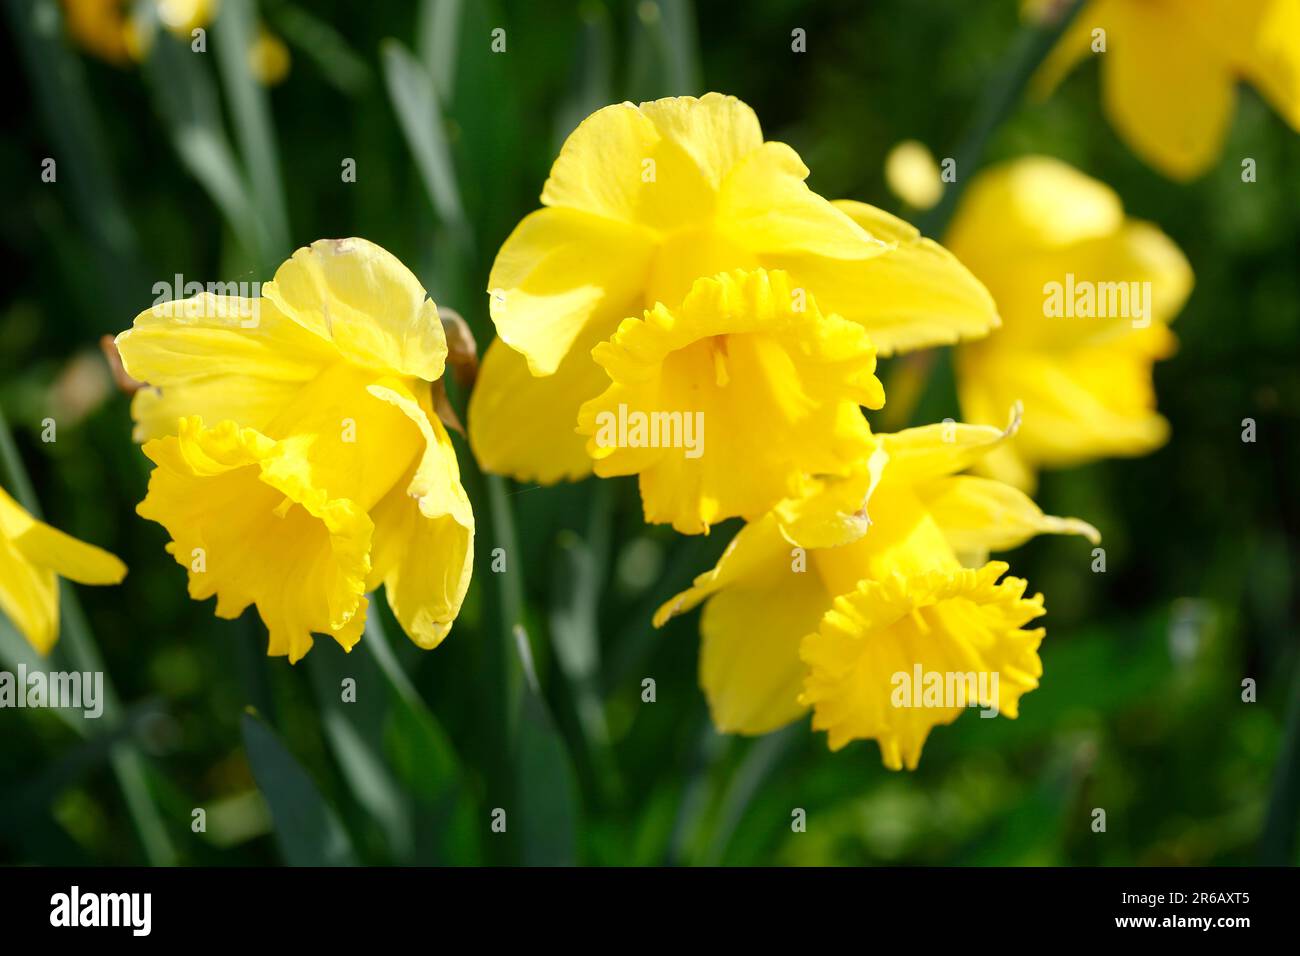 Yellow Daffodils, Daffodil Flower (Narcissus Pseudonarcissus), Germany Stock Photo